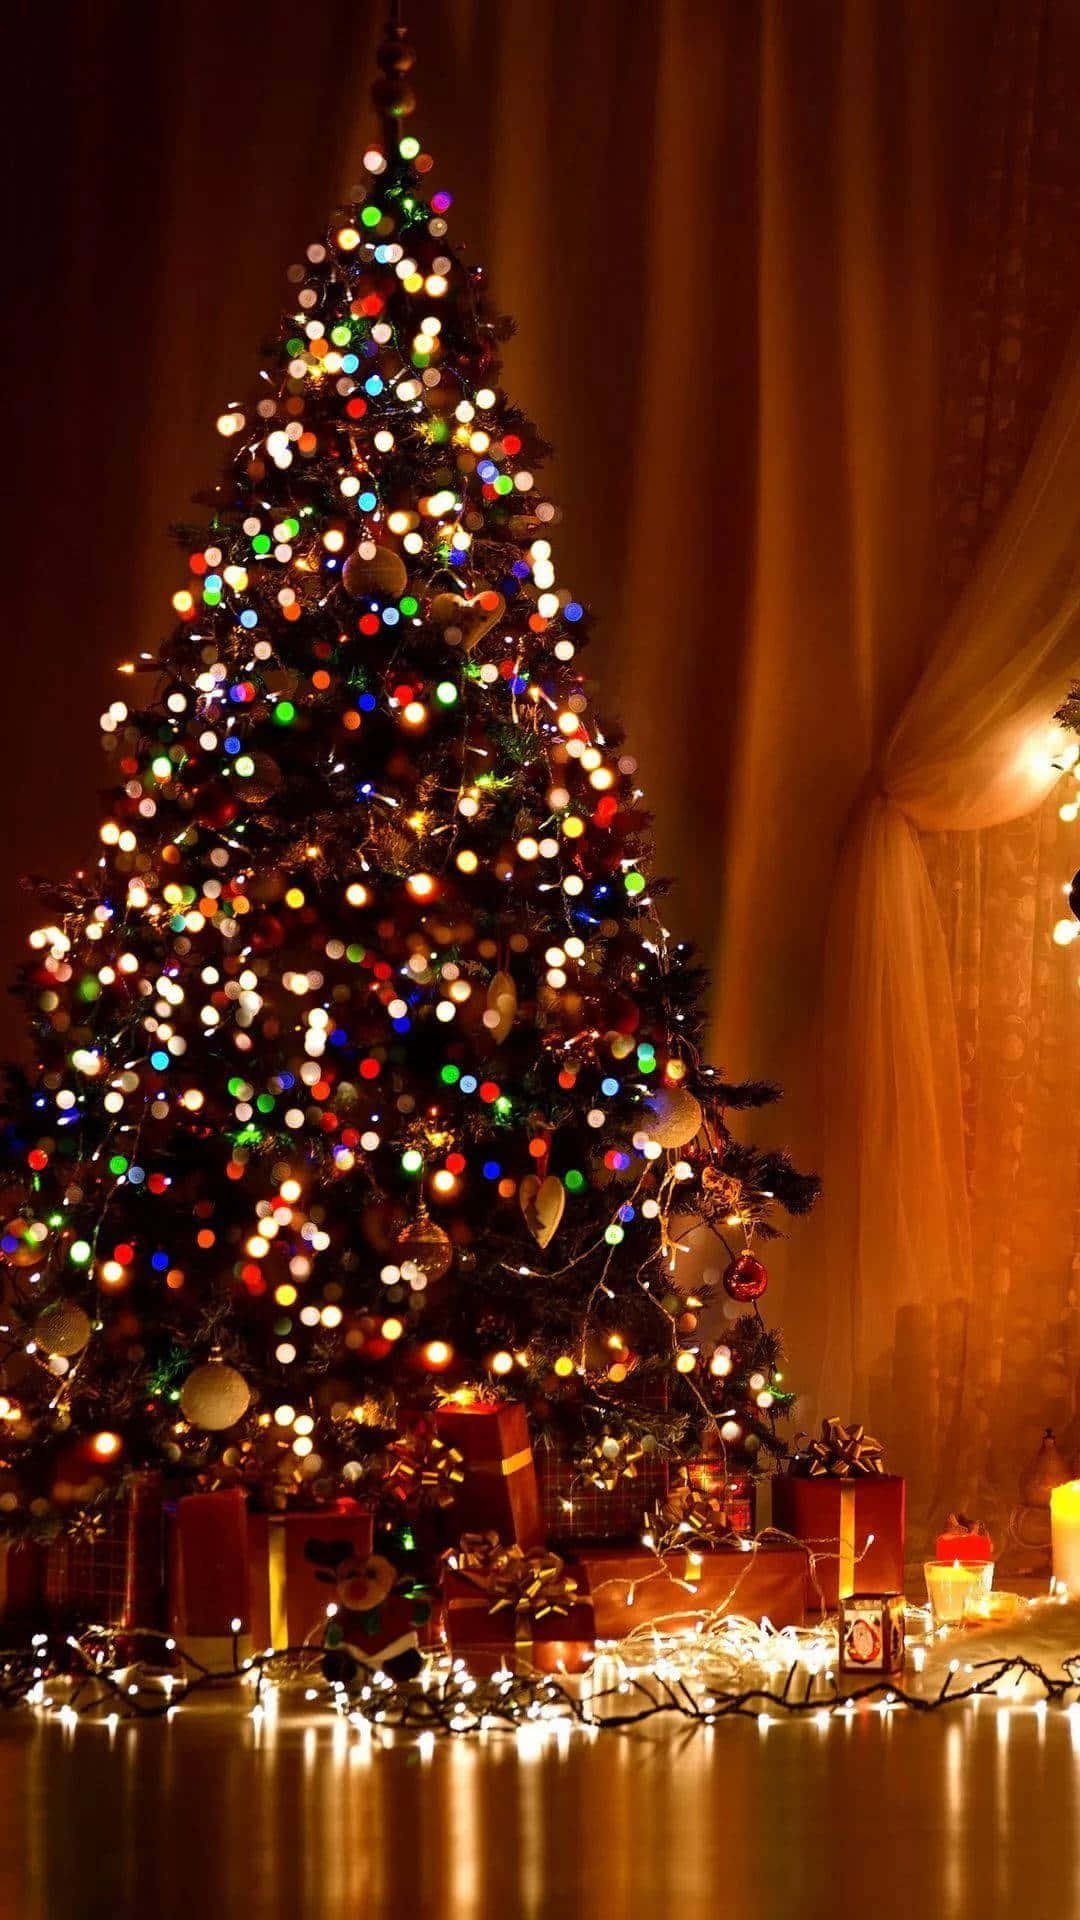 Festive Christmas Tree With Gifts.jpg Wallpaper